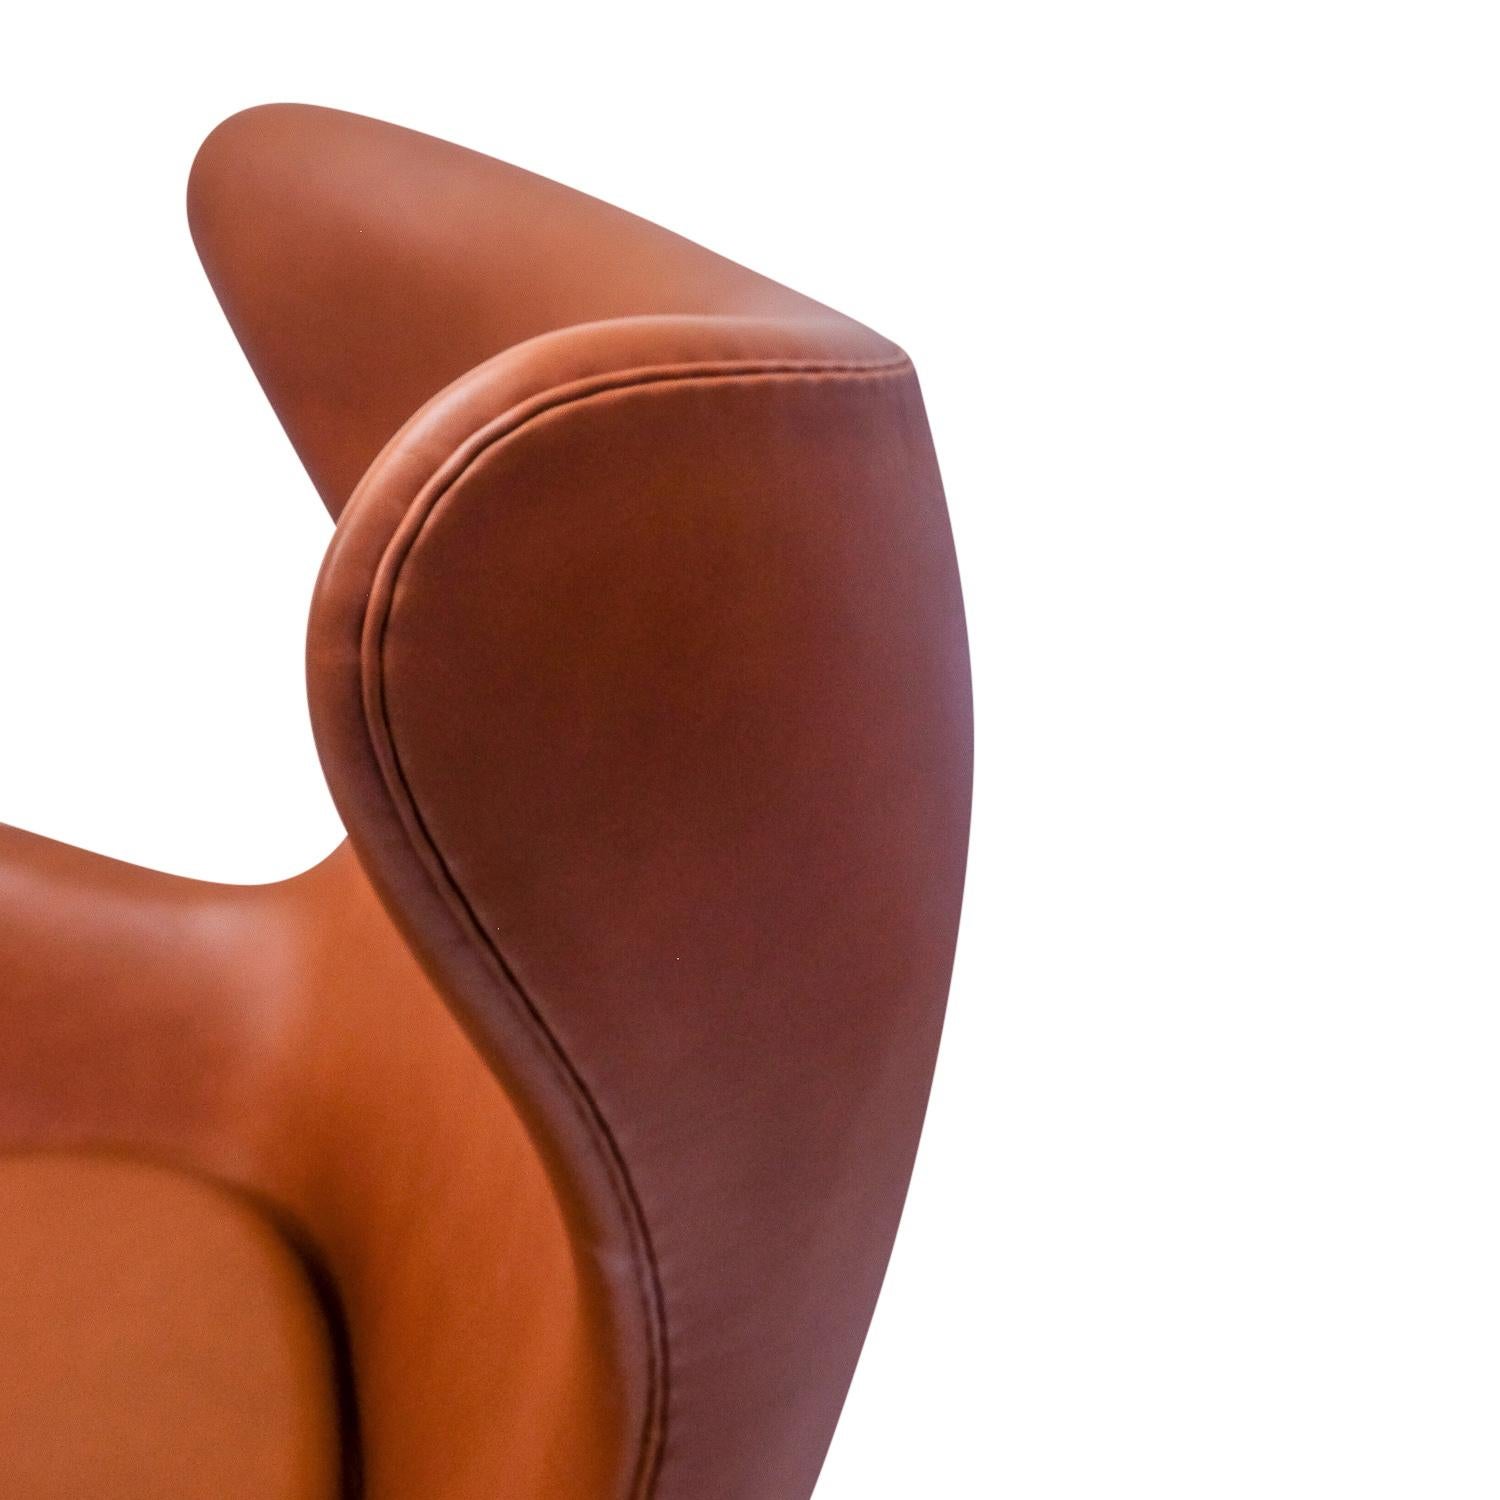 It took some time for Arne Jacobsen and Fritz Hansen to develop the Swan chair, first editions were based on a wooden shell that was bent into shape. The leather upholstery is still done by hand, a painstaking process ensuring the leather to be